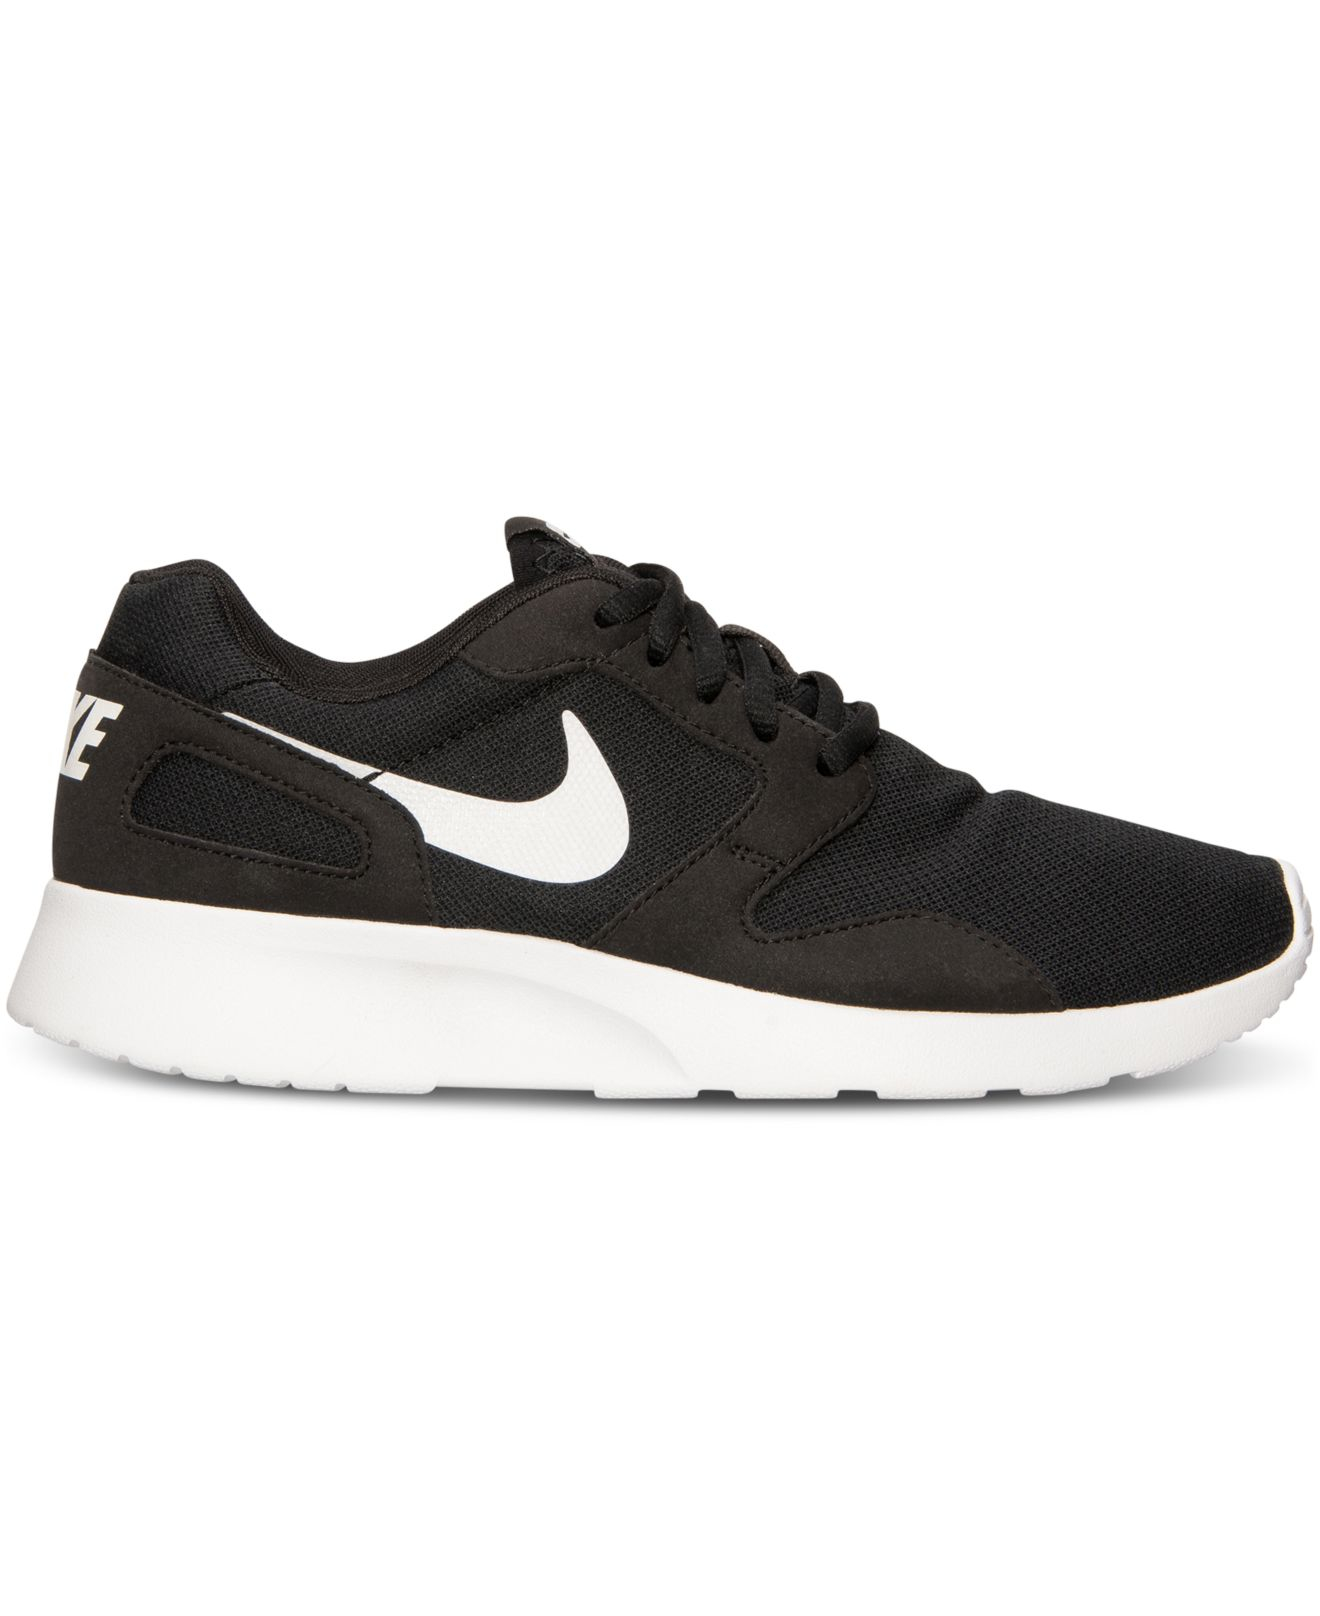 Lyst - Nike Women's Kaishi Casual Sneakers From Finish Line in Black